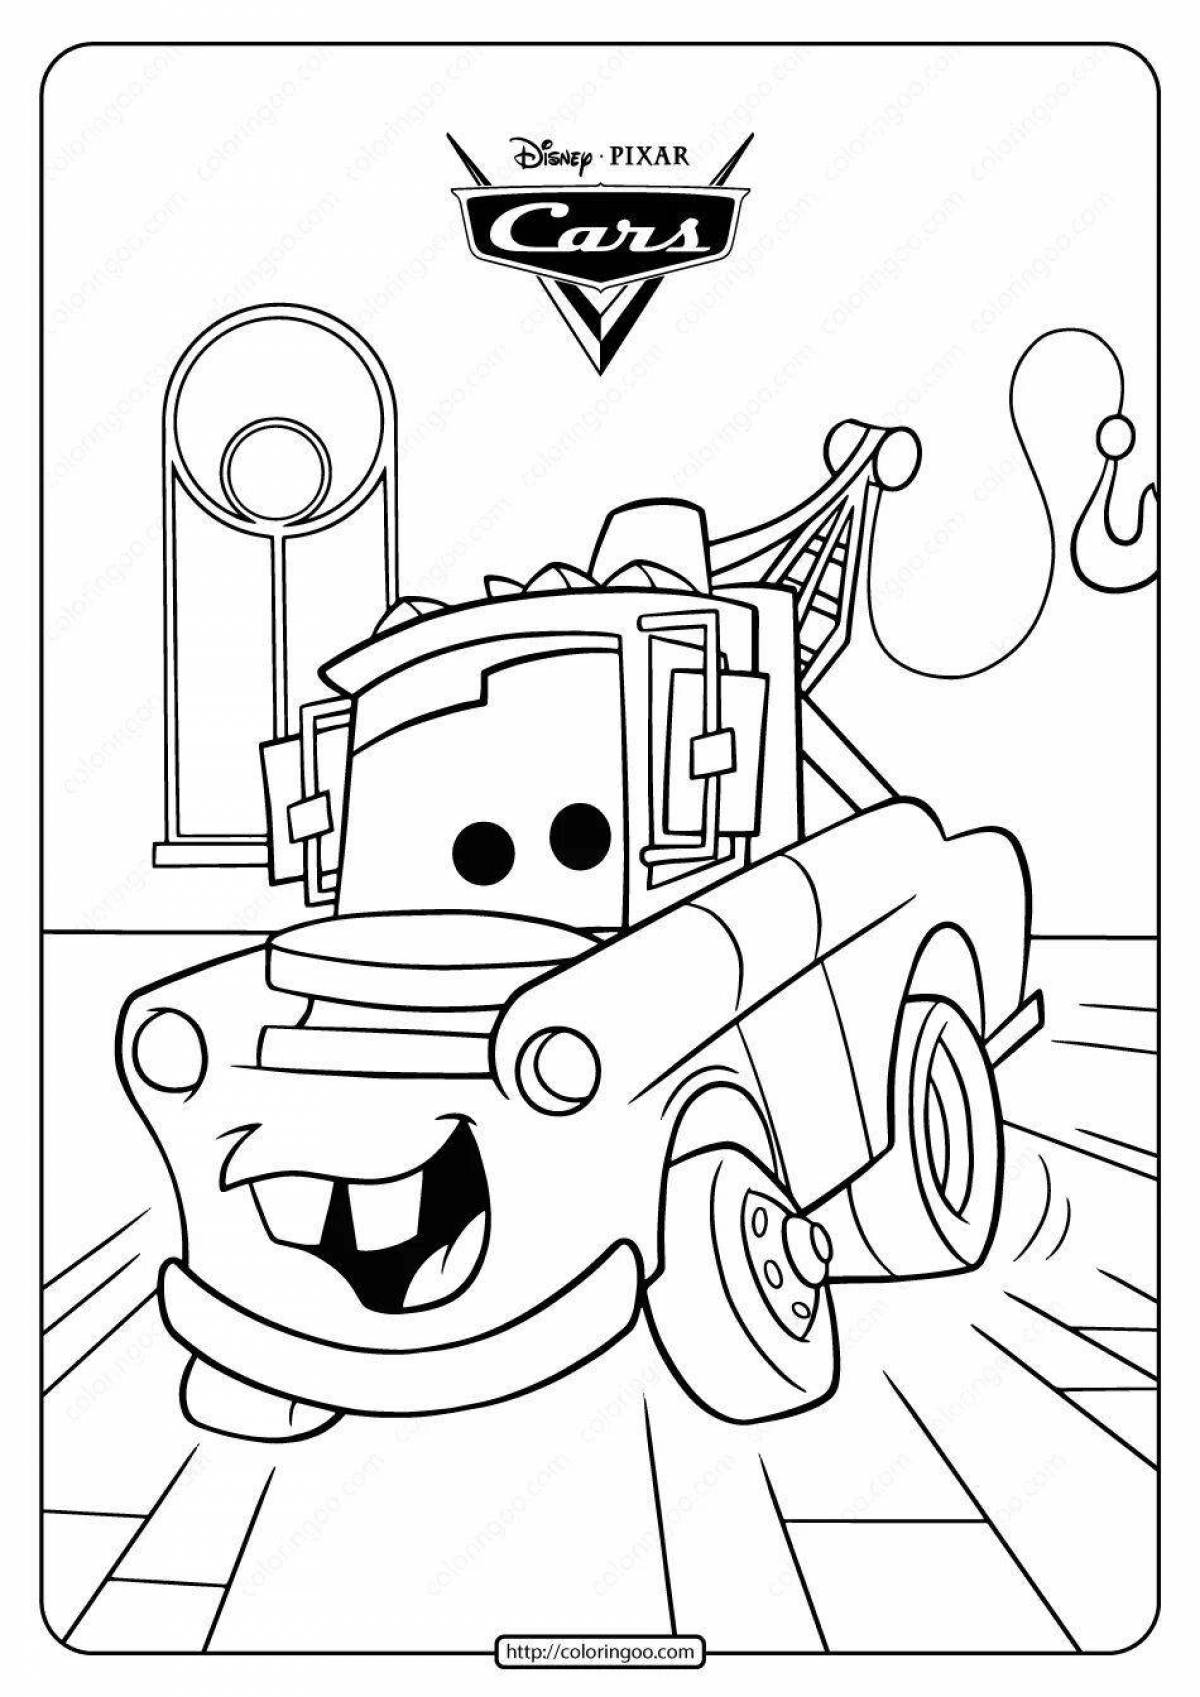 Cute harvesters coloring page